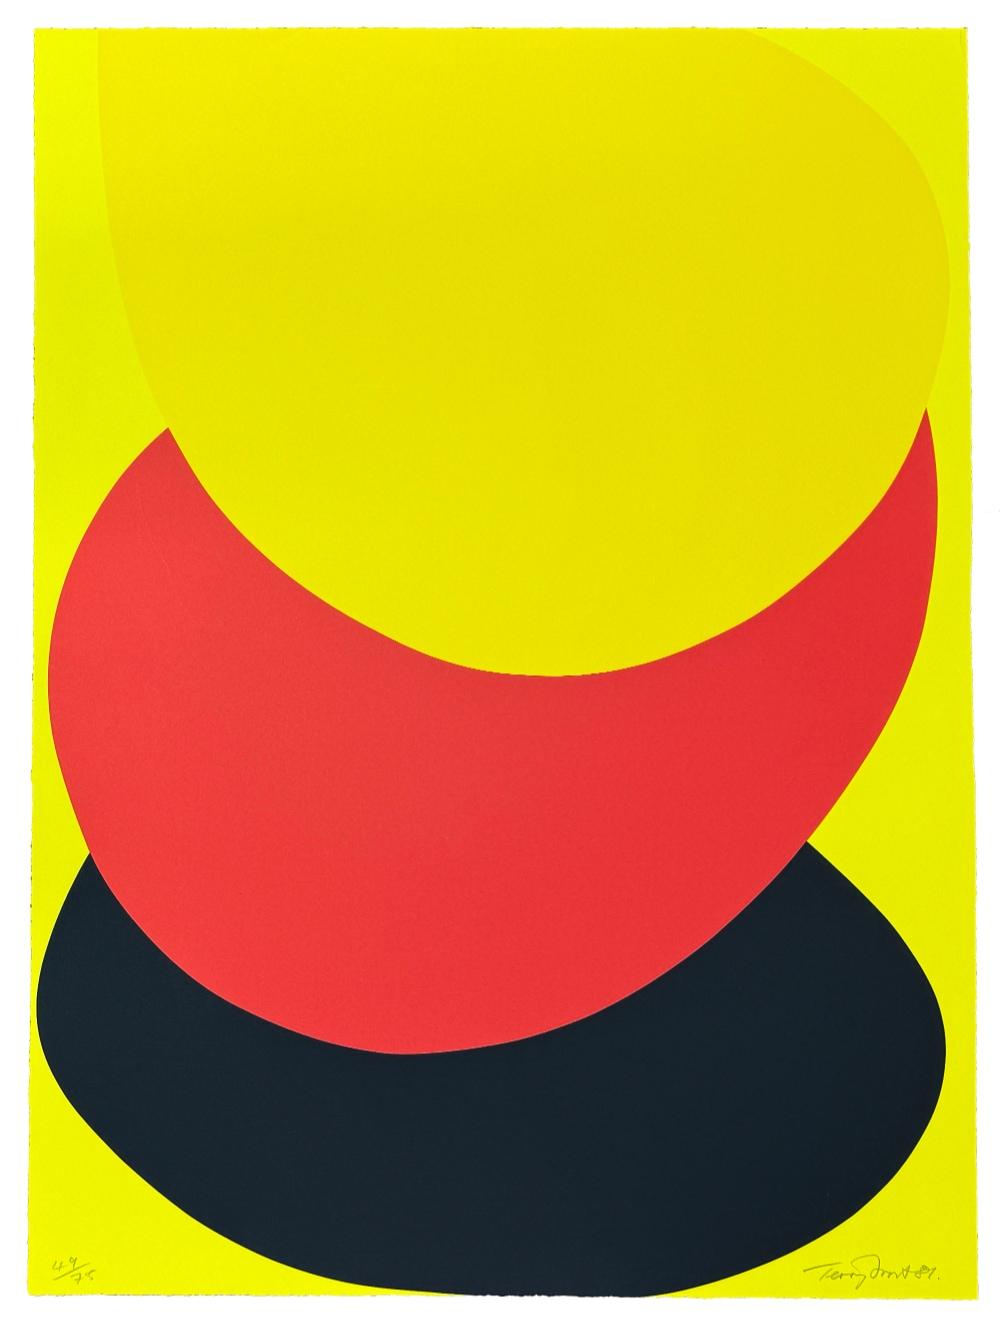 Terry Frost - Suspended Red, Yellow and Black